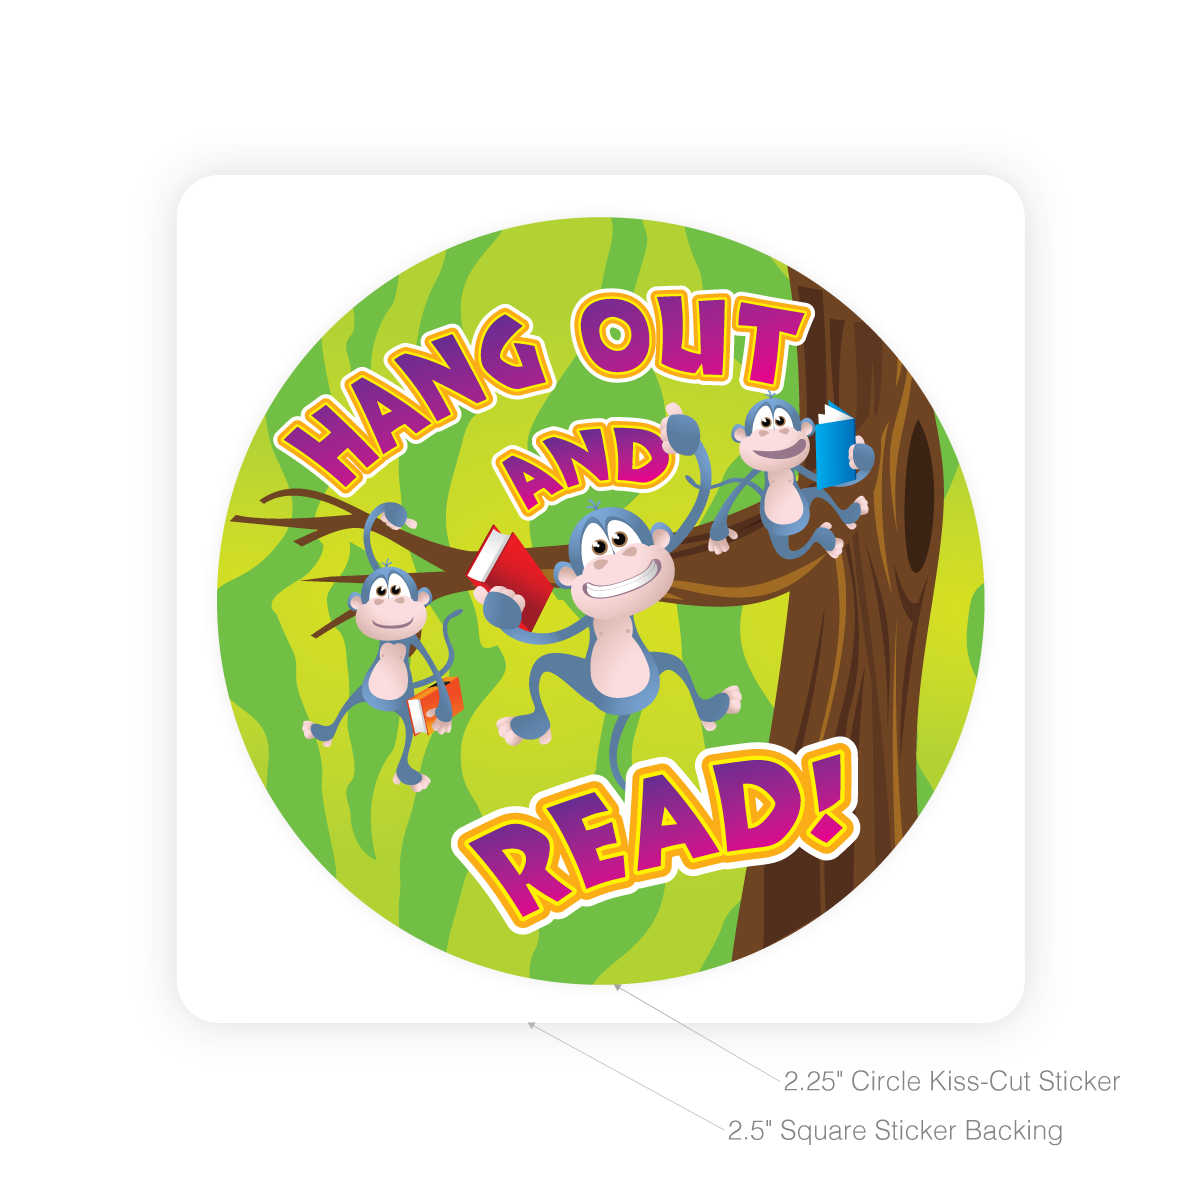 Round Sticker - Hang Out And Read